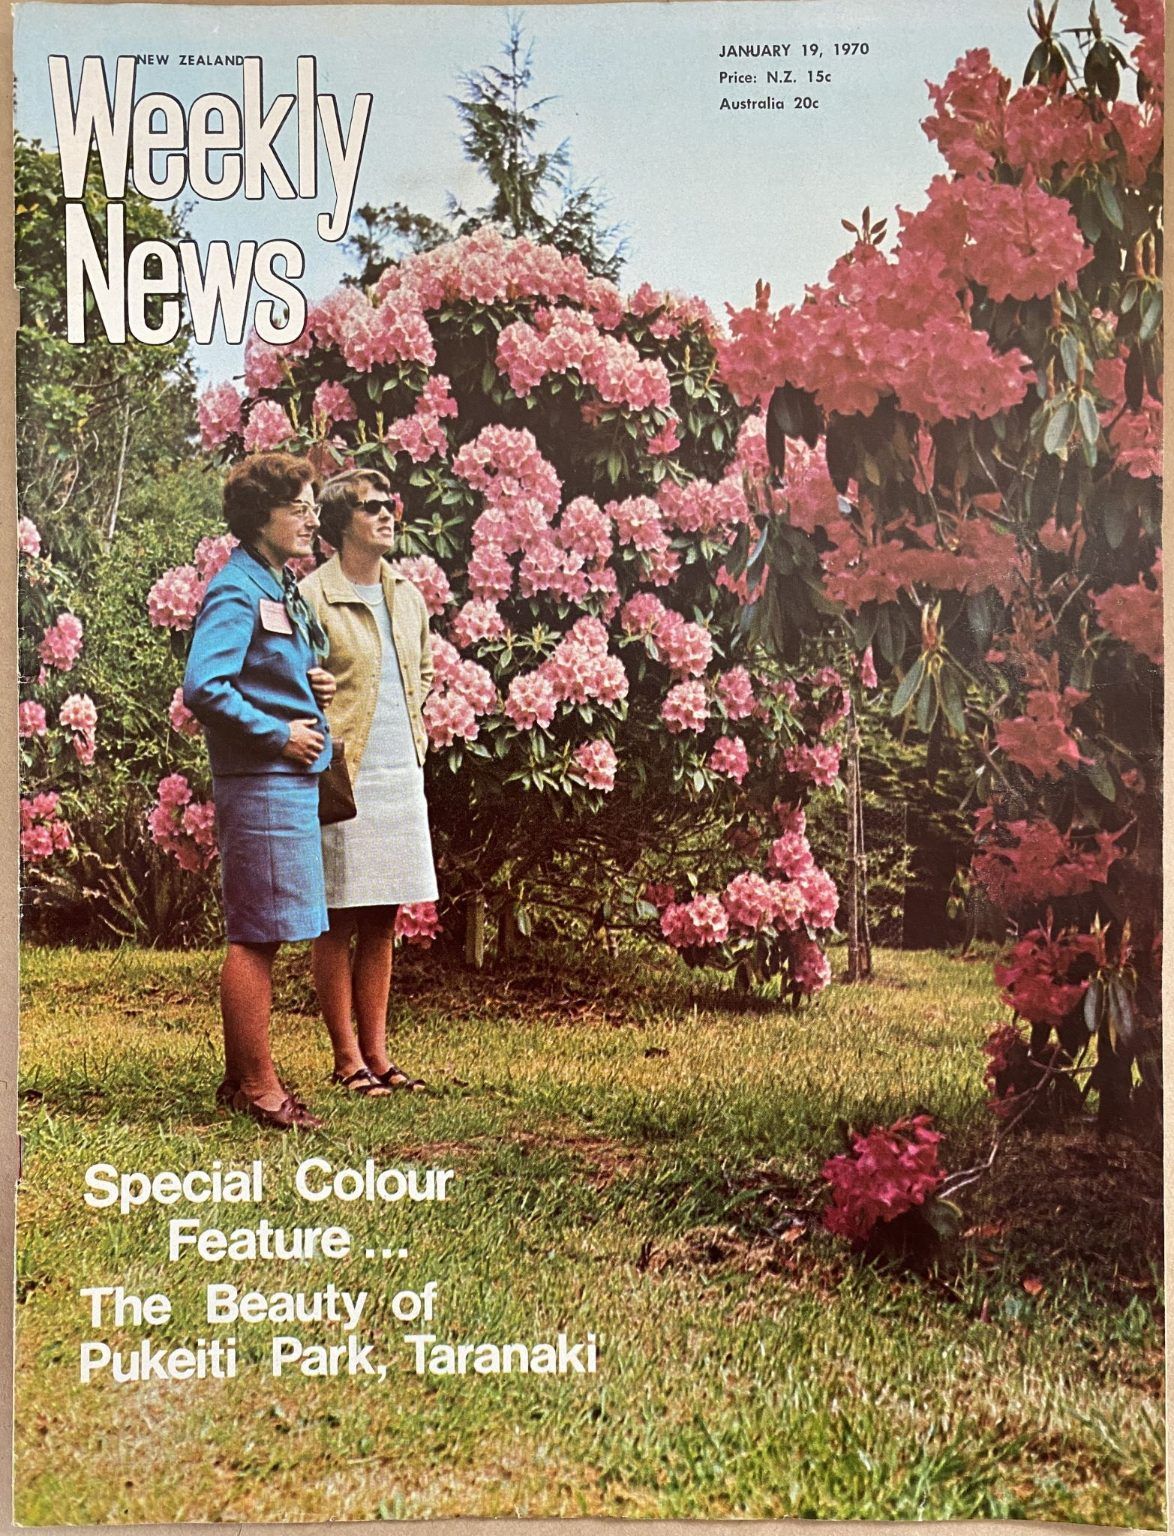 OLD NEWSPAPER: New Zealand Weekly News, No. 5538, 19 January 1970